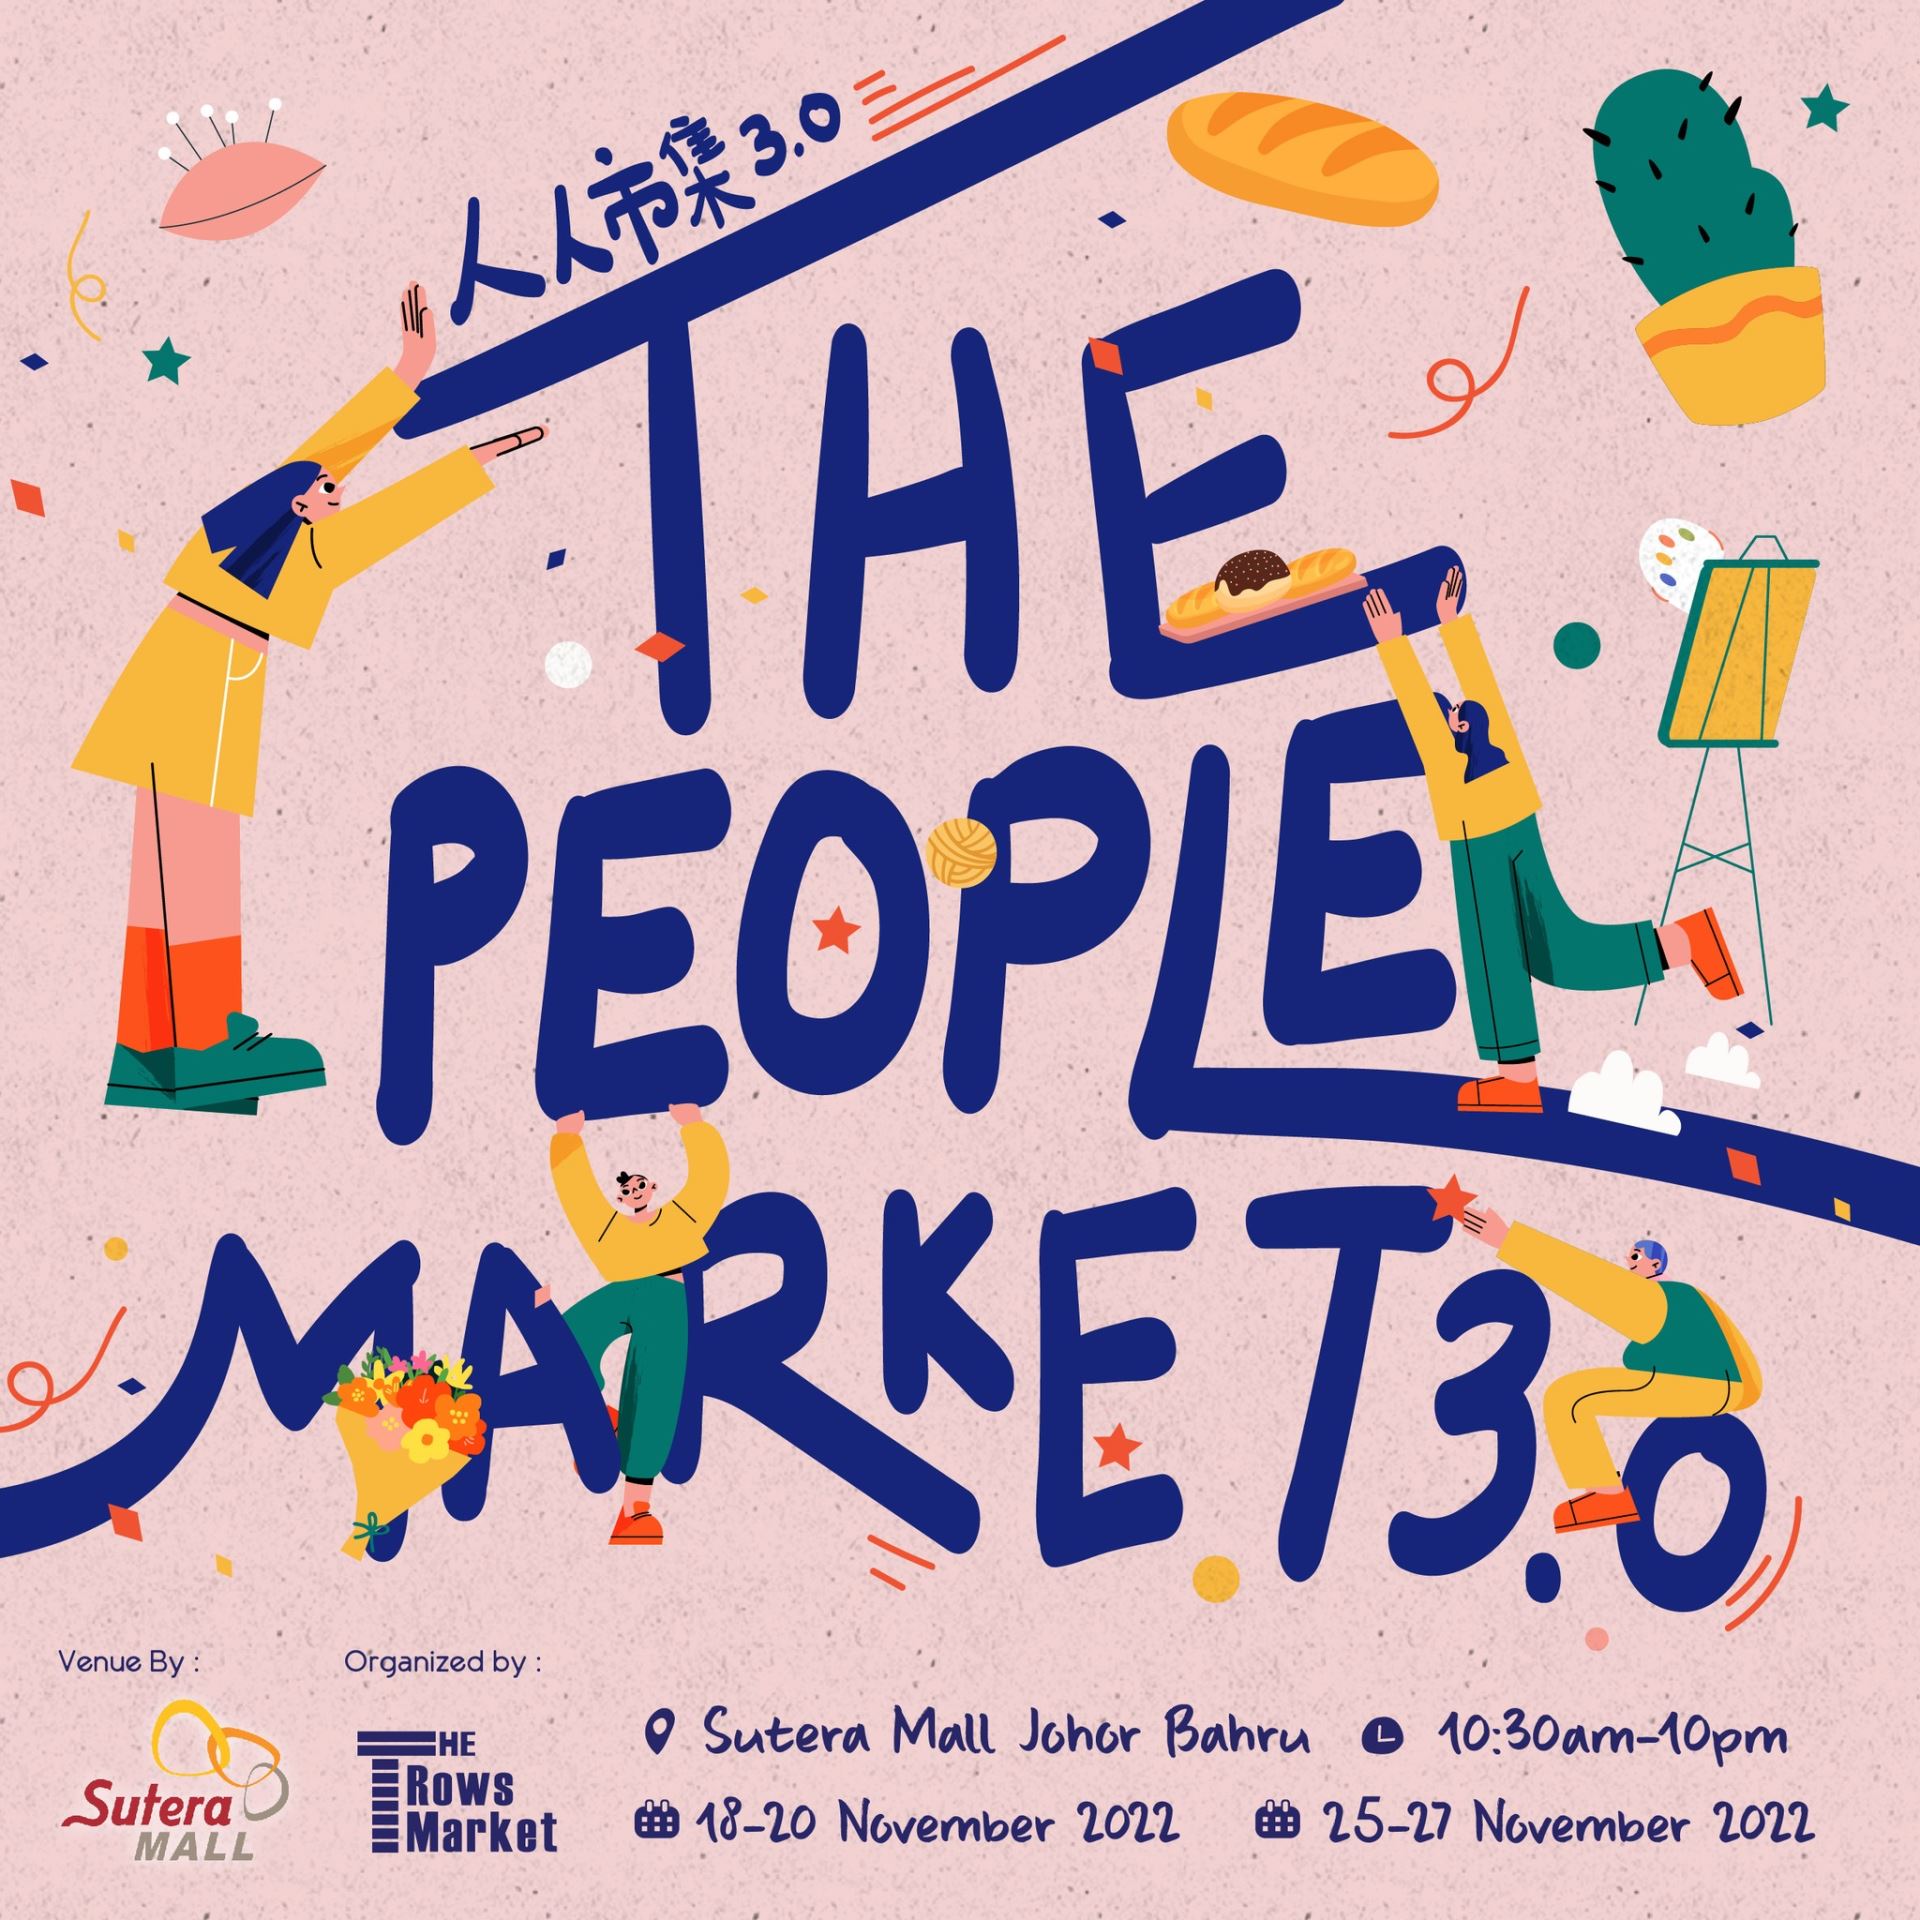 The People Market 3.0